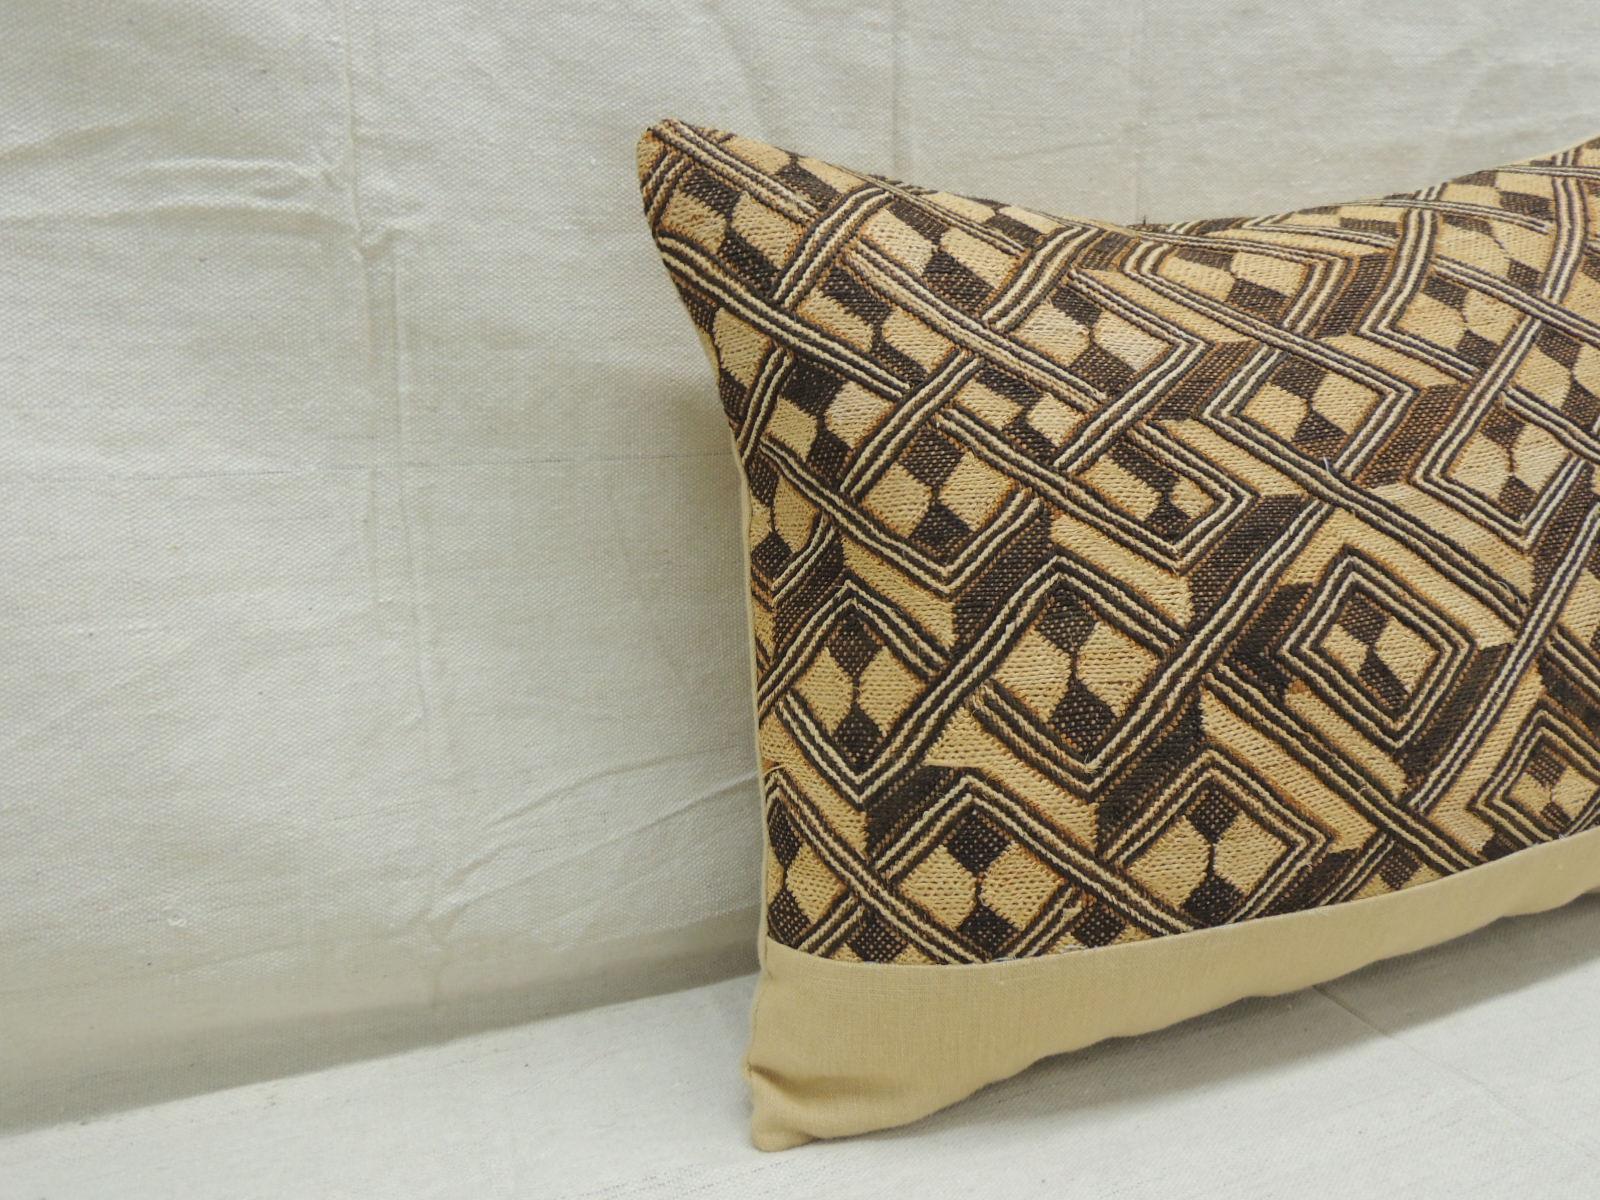 Vintage tan and brown African Kuba decorative bolster pillow
with texture Yellow frame and same yellow linen backing.
Decorative pillow handcrafted and designed in the USA.
Closure by stitch (no zipper closure) with custom made pillow